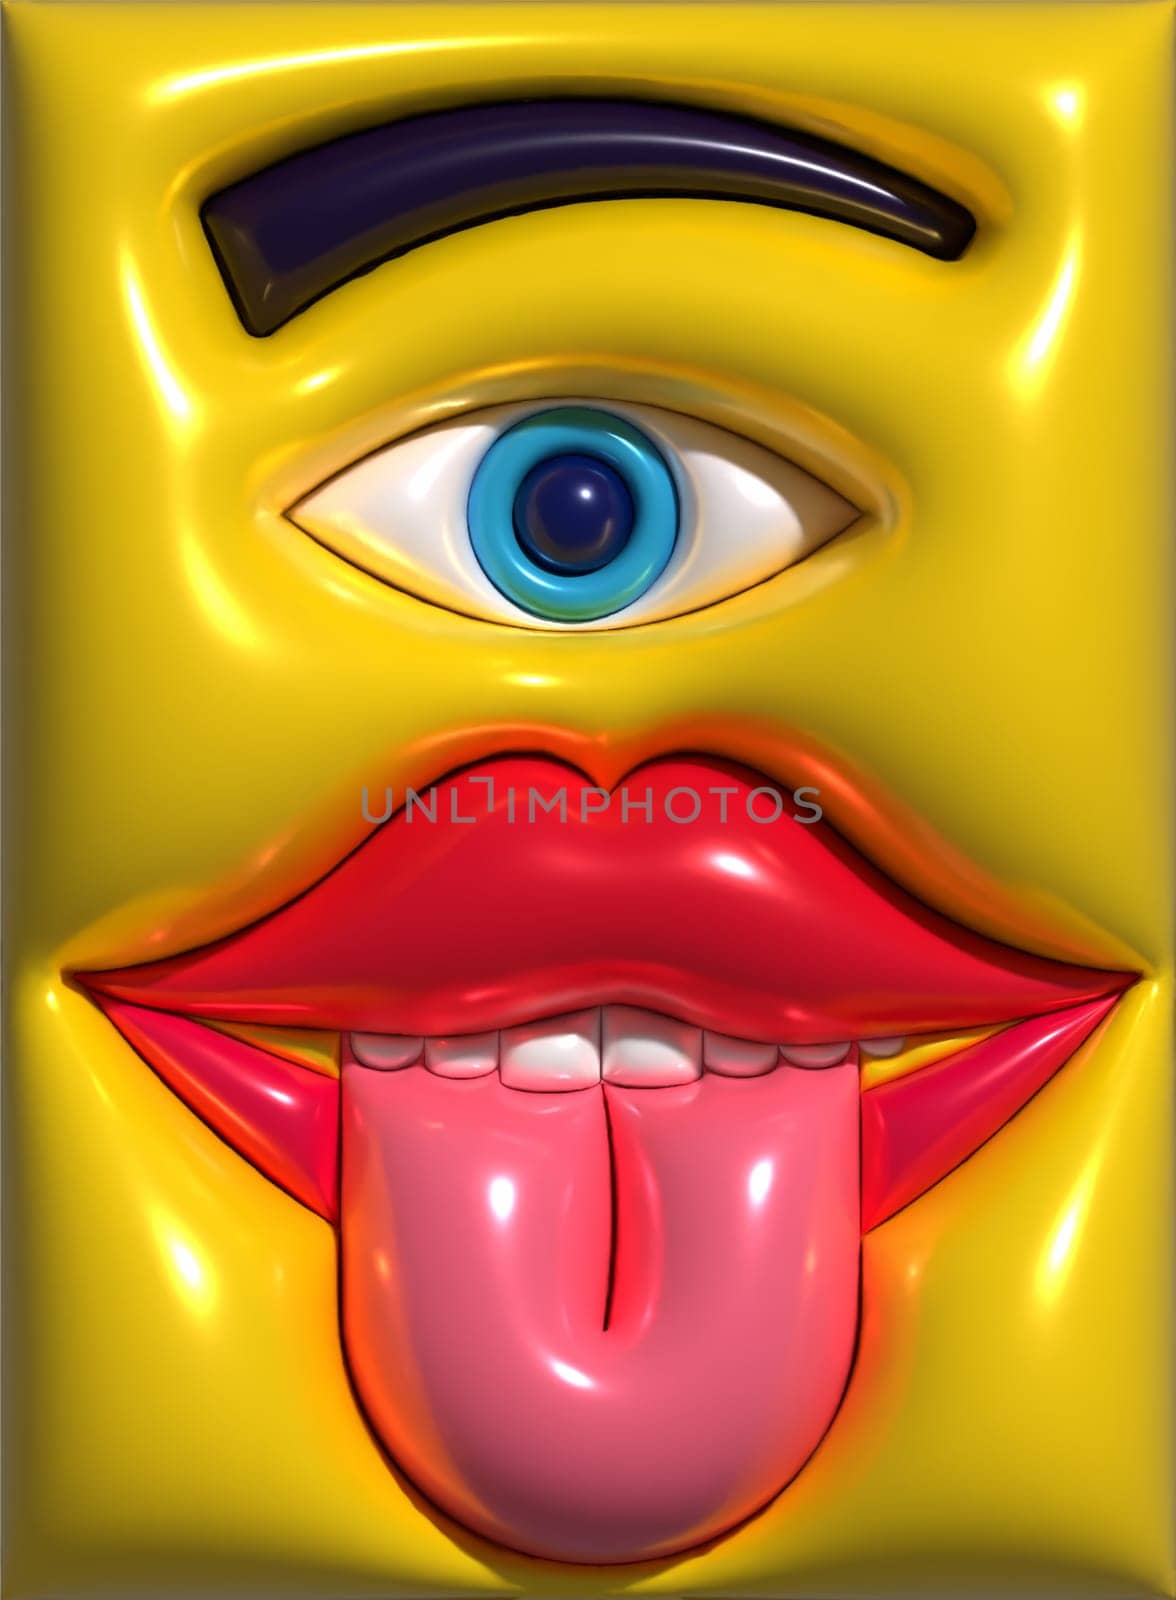 Pink tongue protruding from mouth with white teeth and eye with eyebrow, 3D rendering illustration